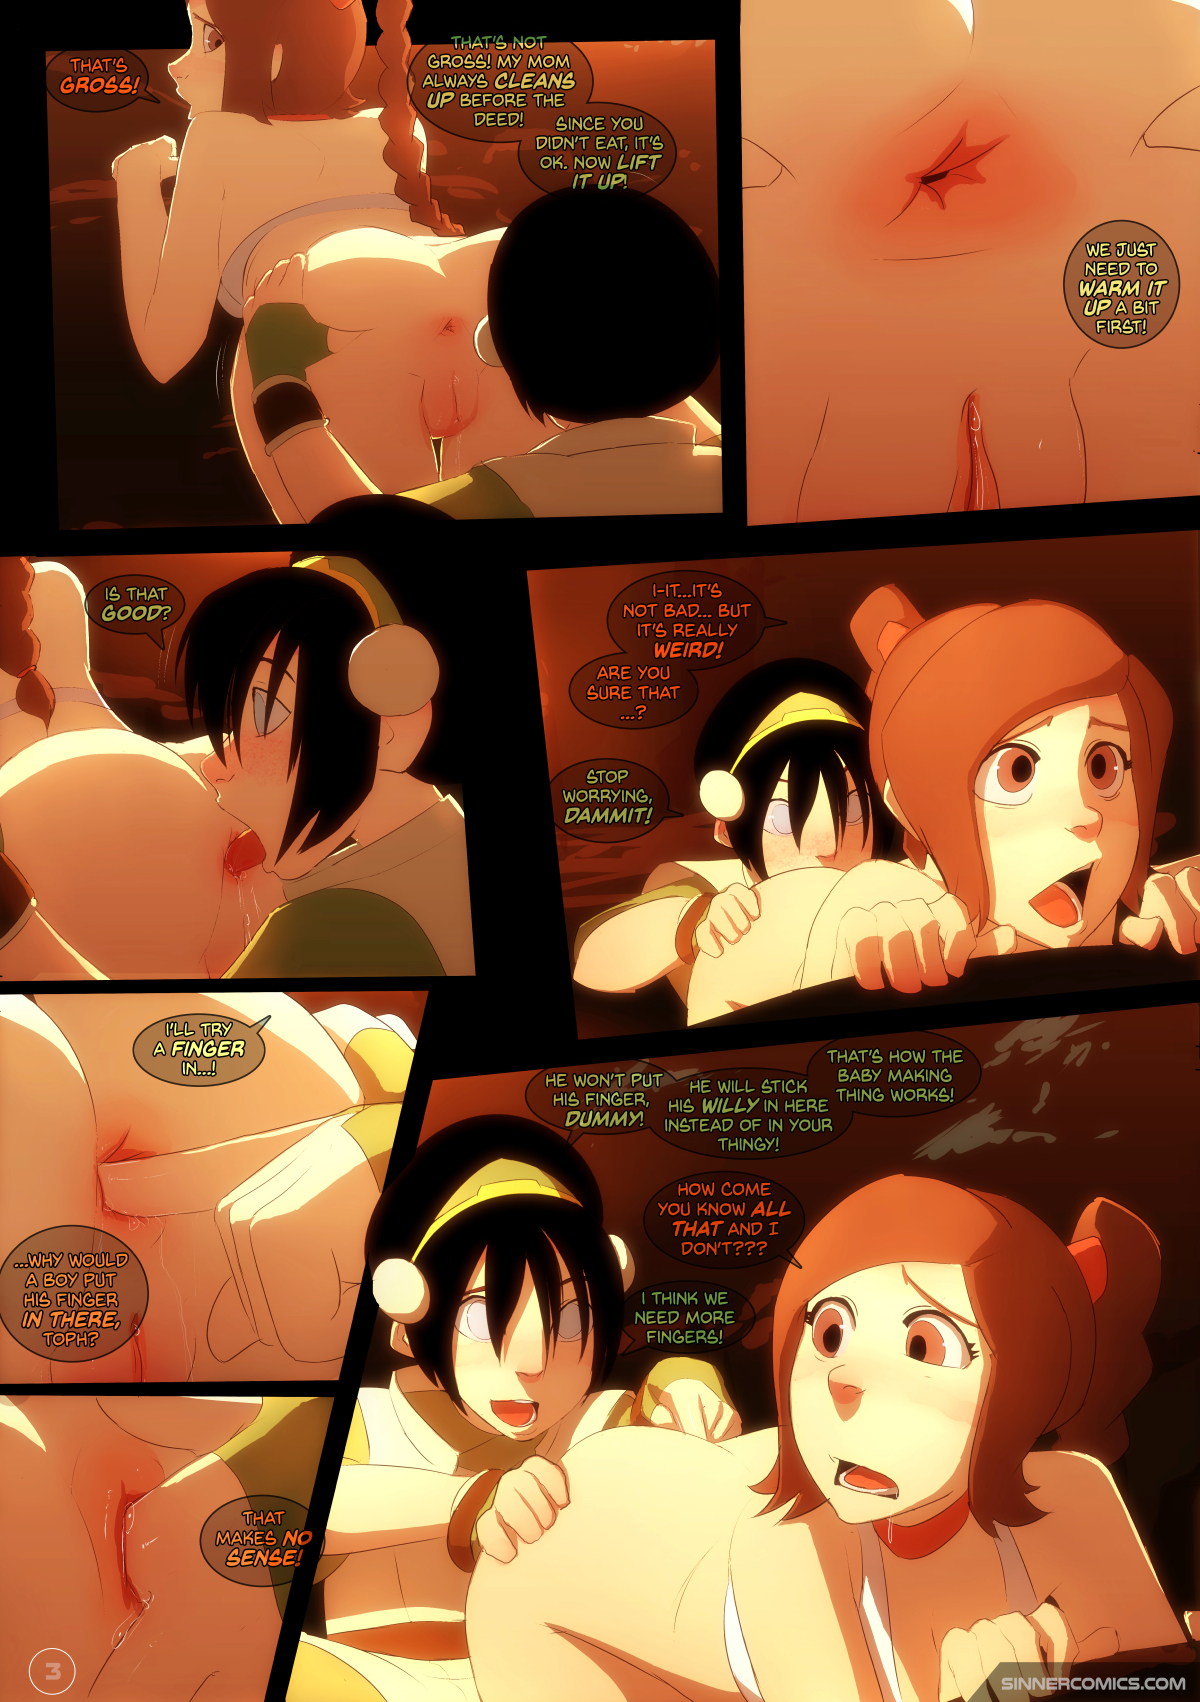 Updated comic by Sinnercomics - Sillygirl - Toph vs Ty Lee - Avatar The Last Airbender - 9 pages - Adult comic